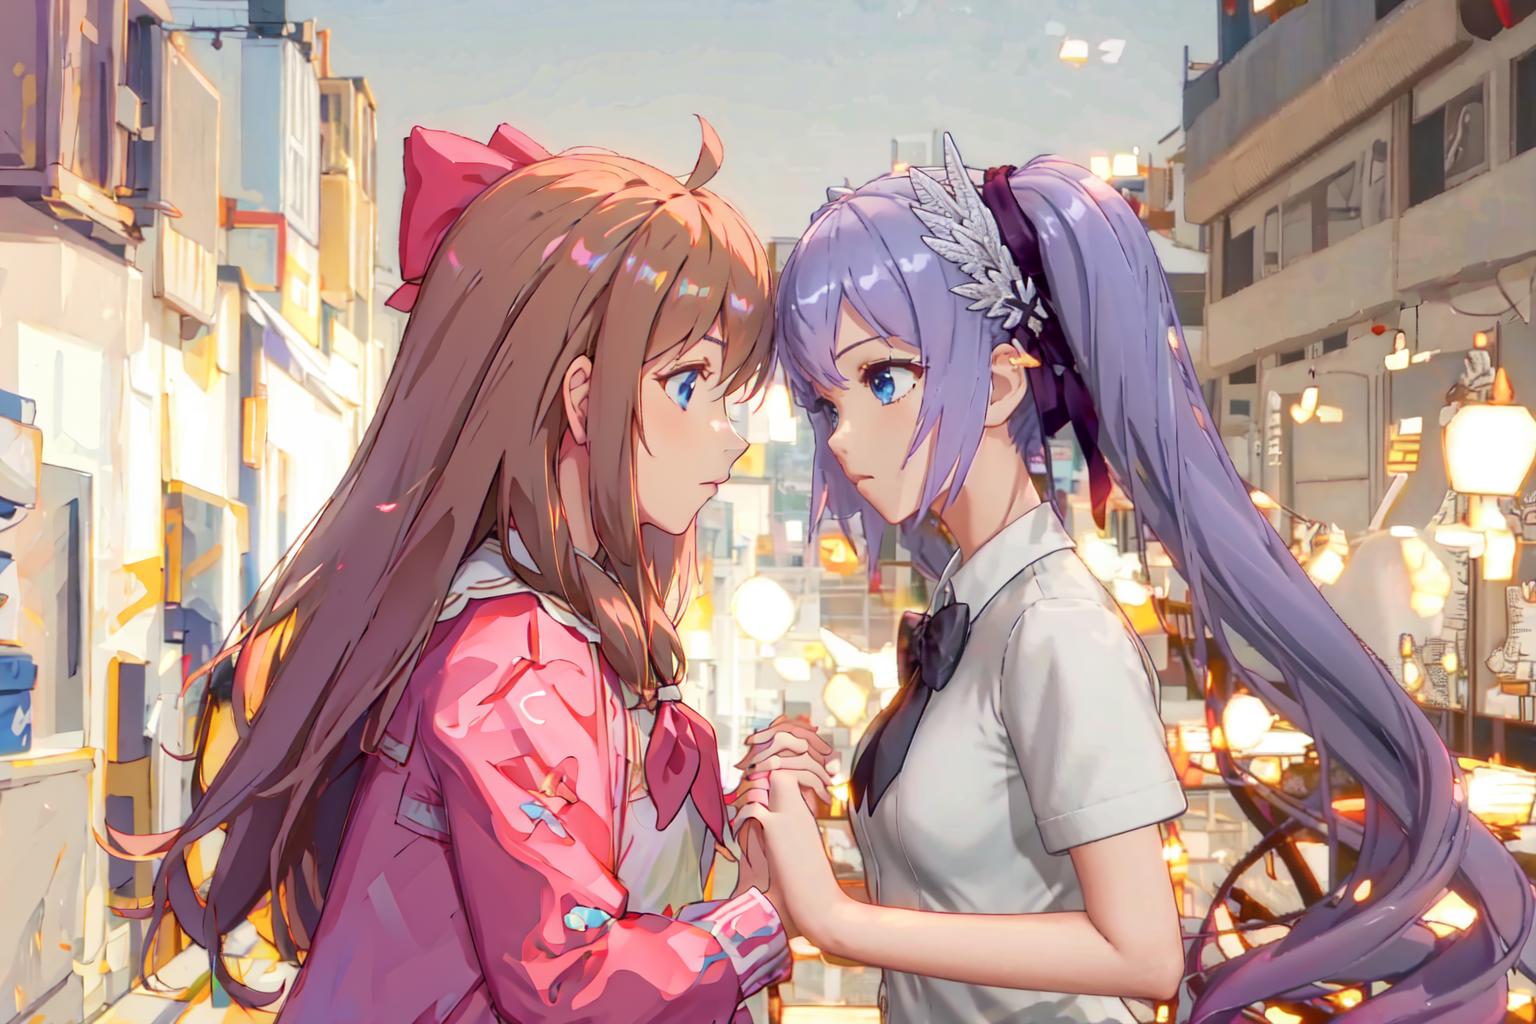 Two anime characters holding hands in a city scene.